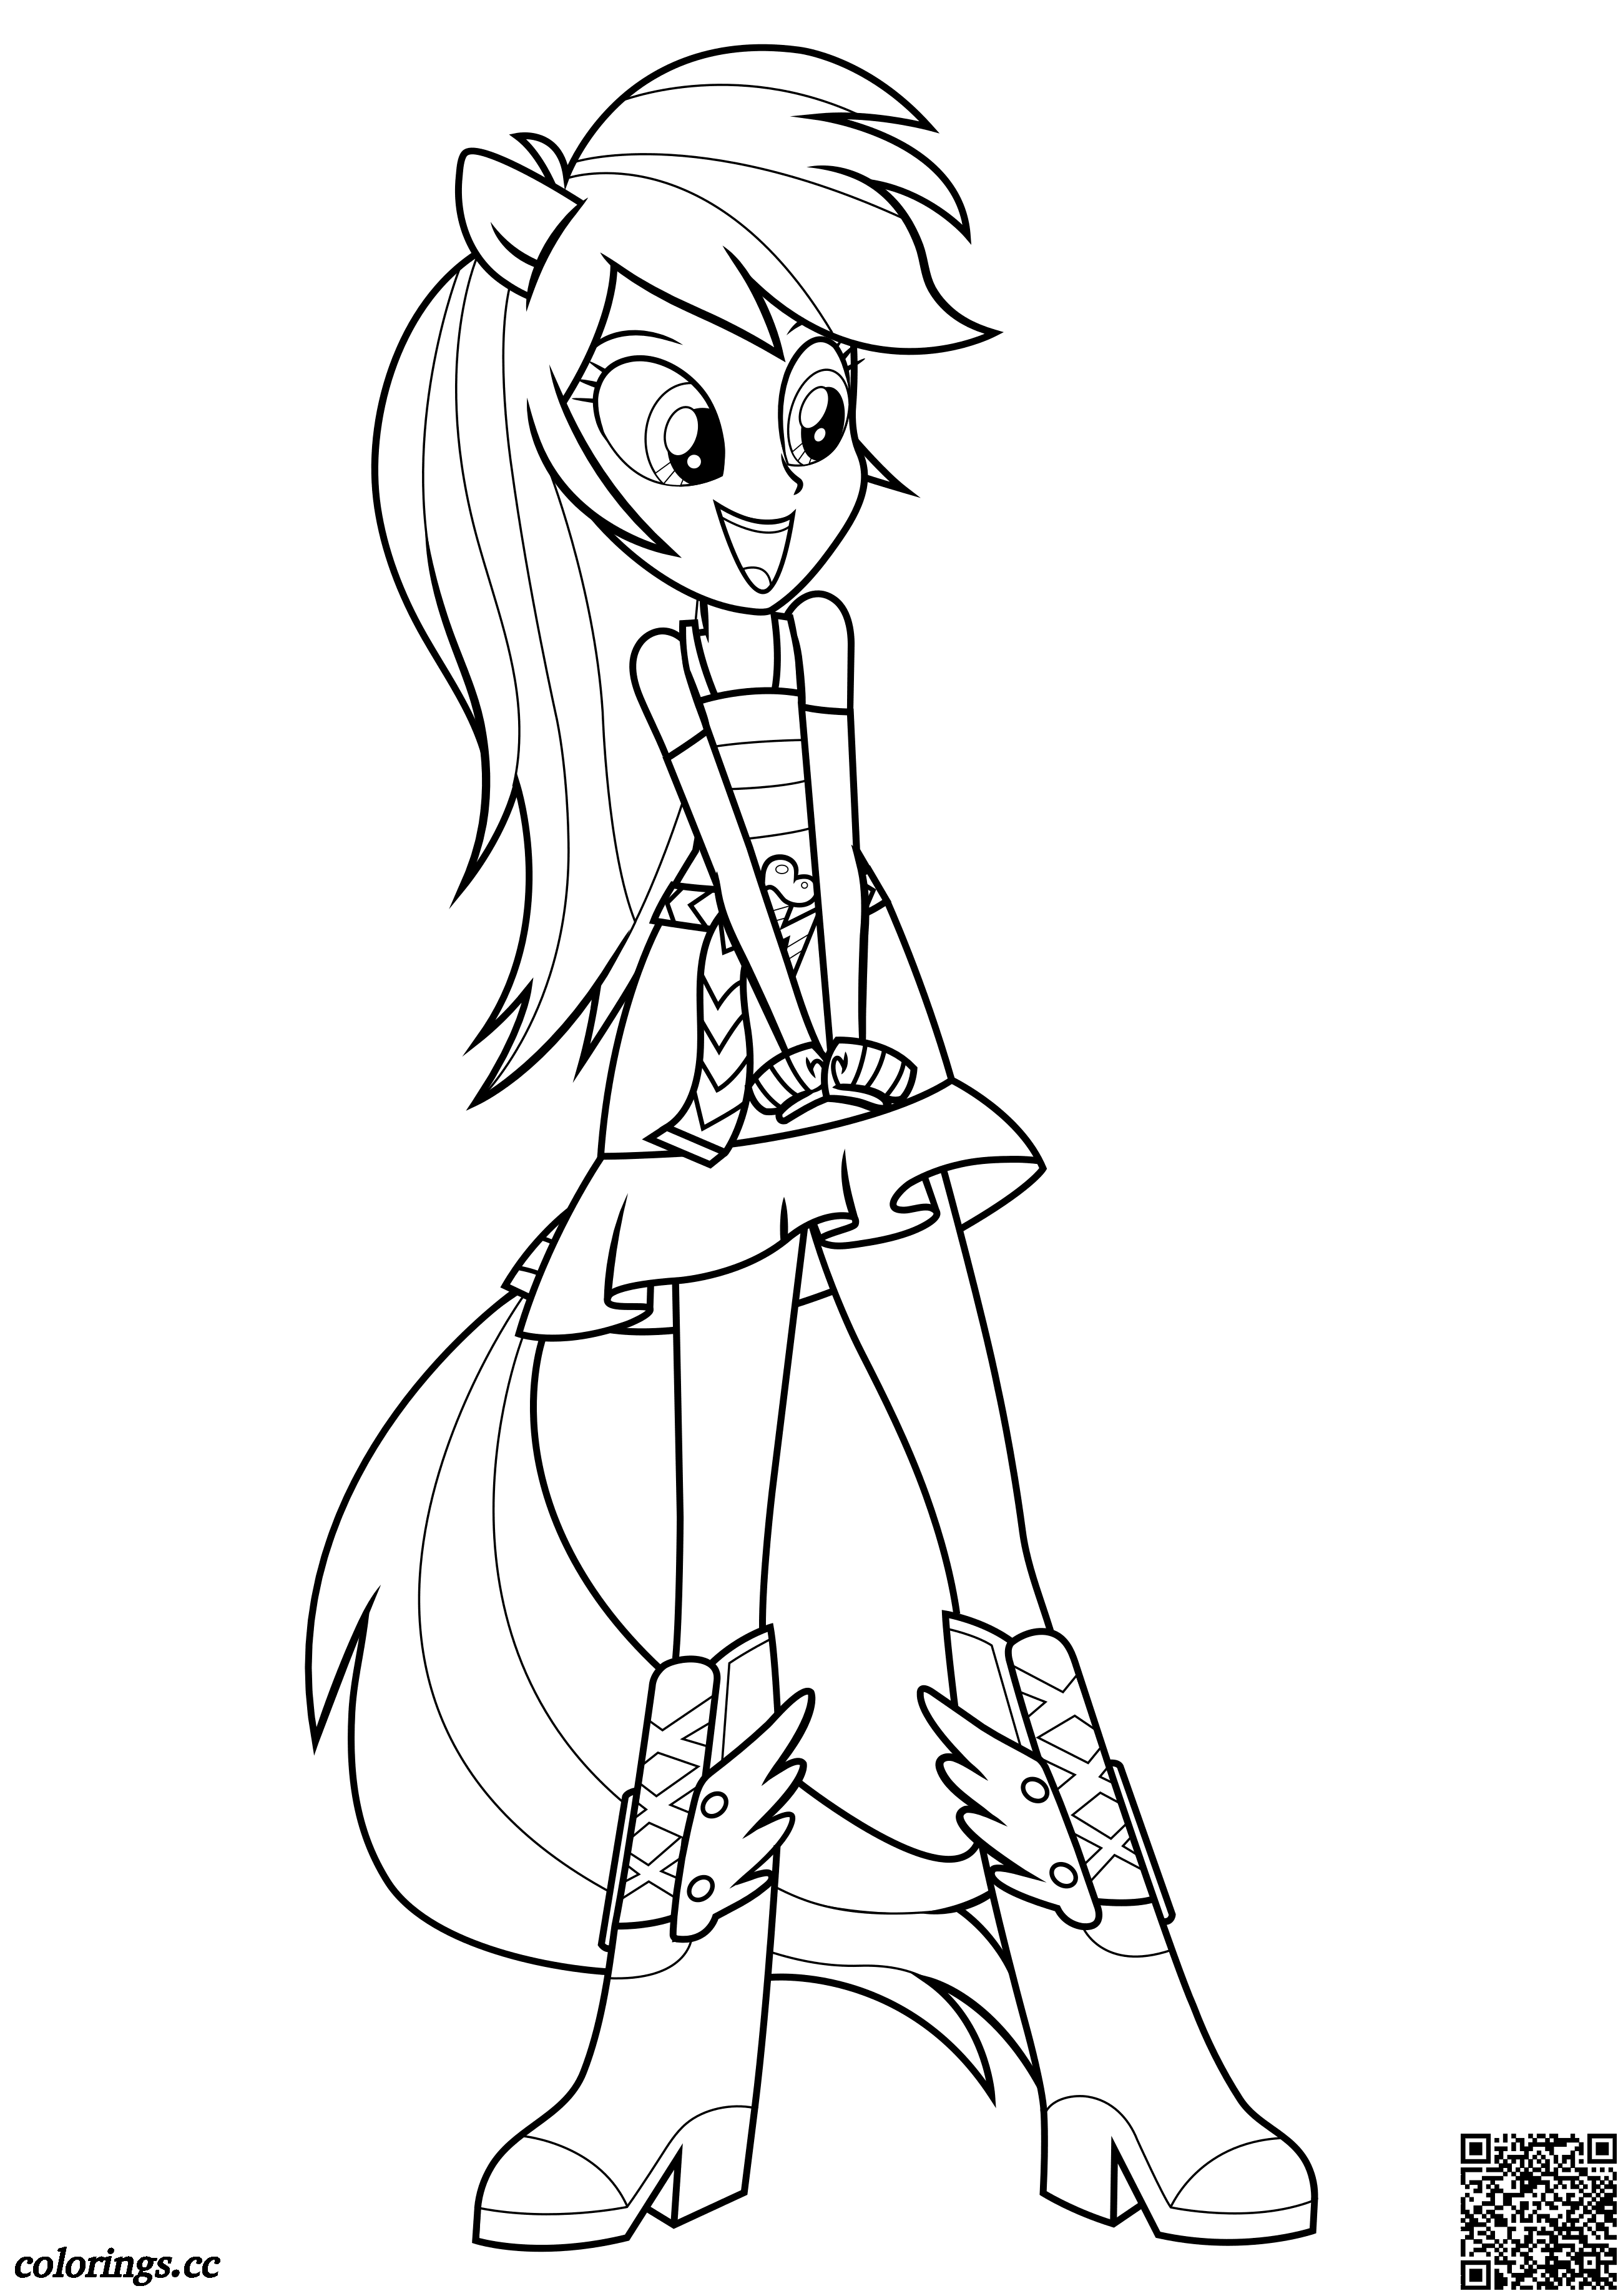 Rainbow Dash Dance coloring pages, My Little Pony Equestria Girls ...